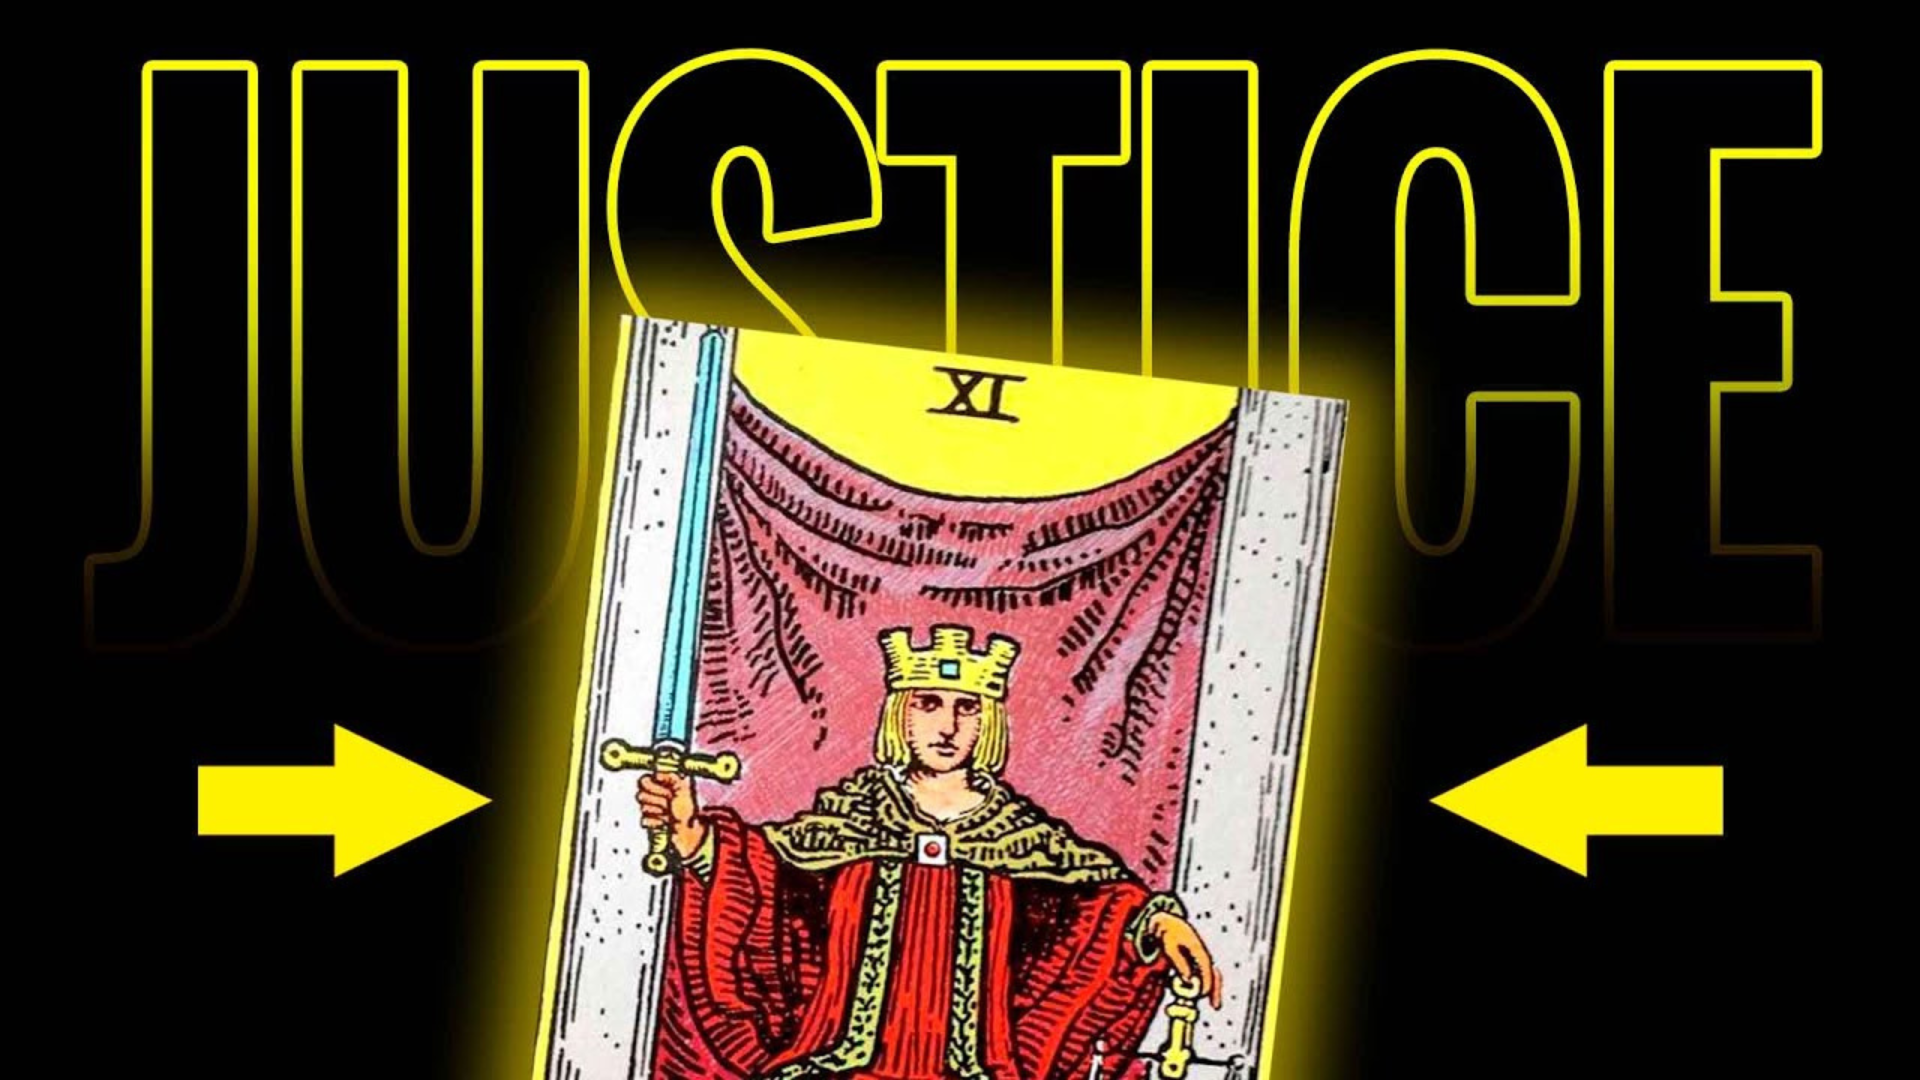 Justice Tarot Card with arrow beside it and word Justice on top of it